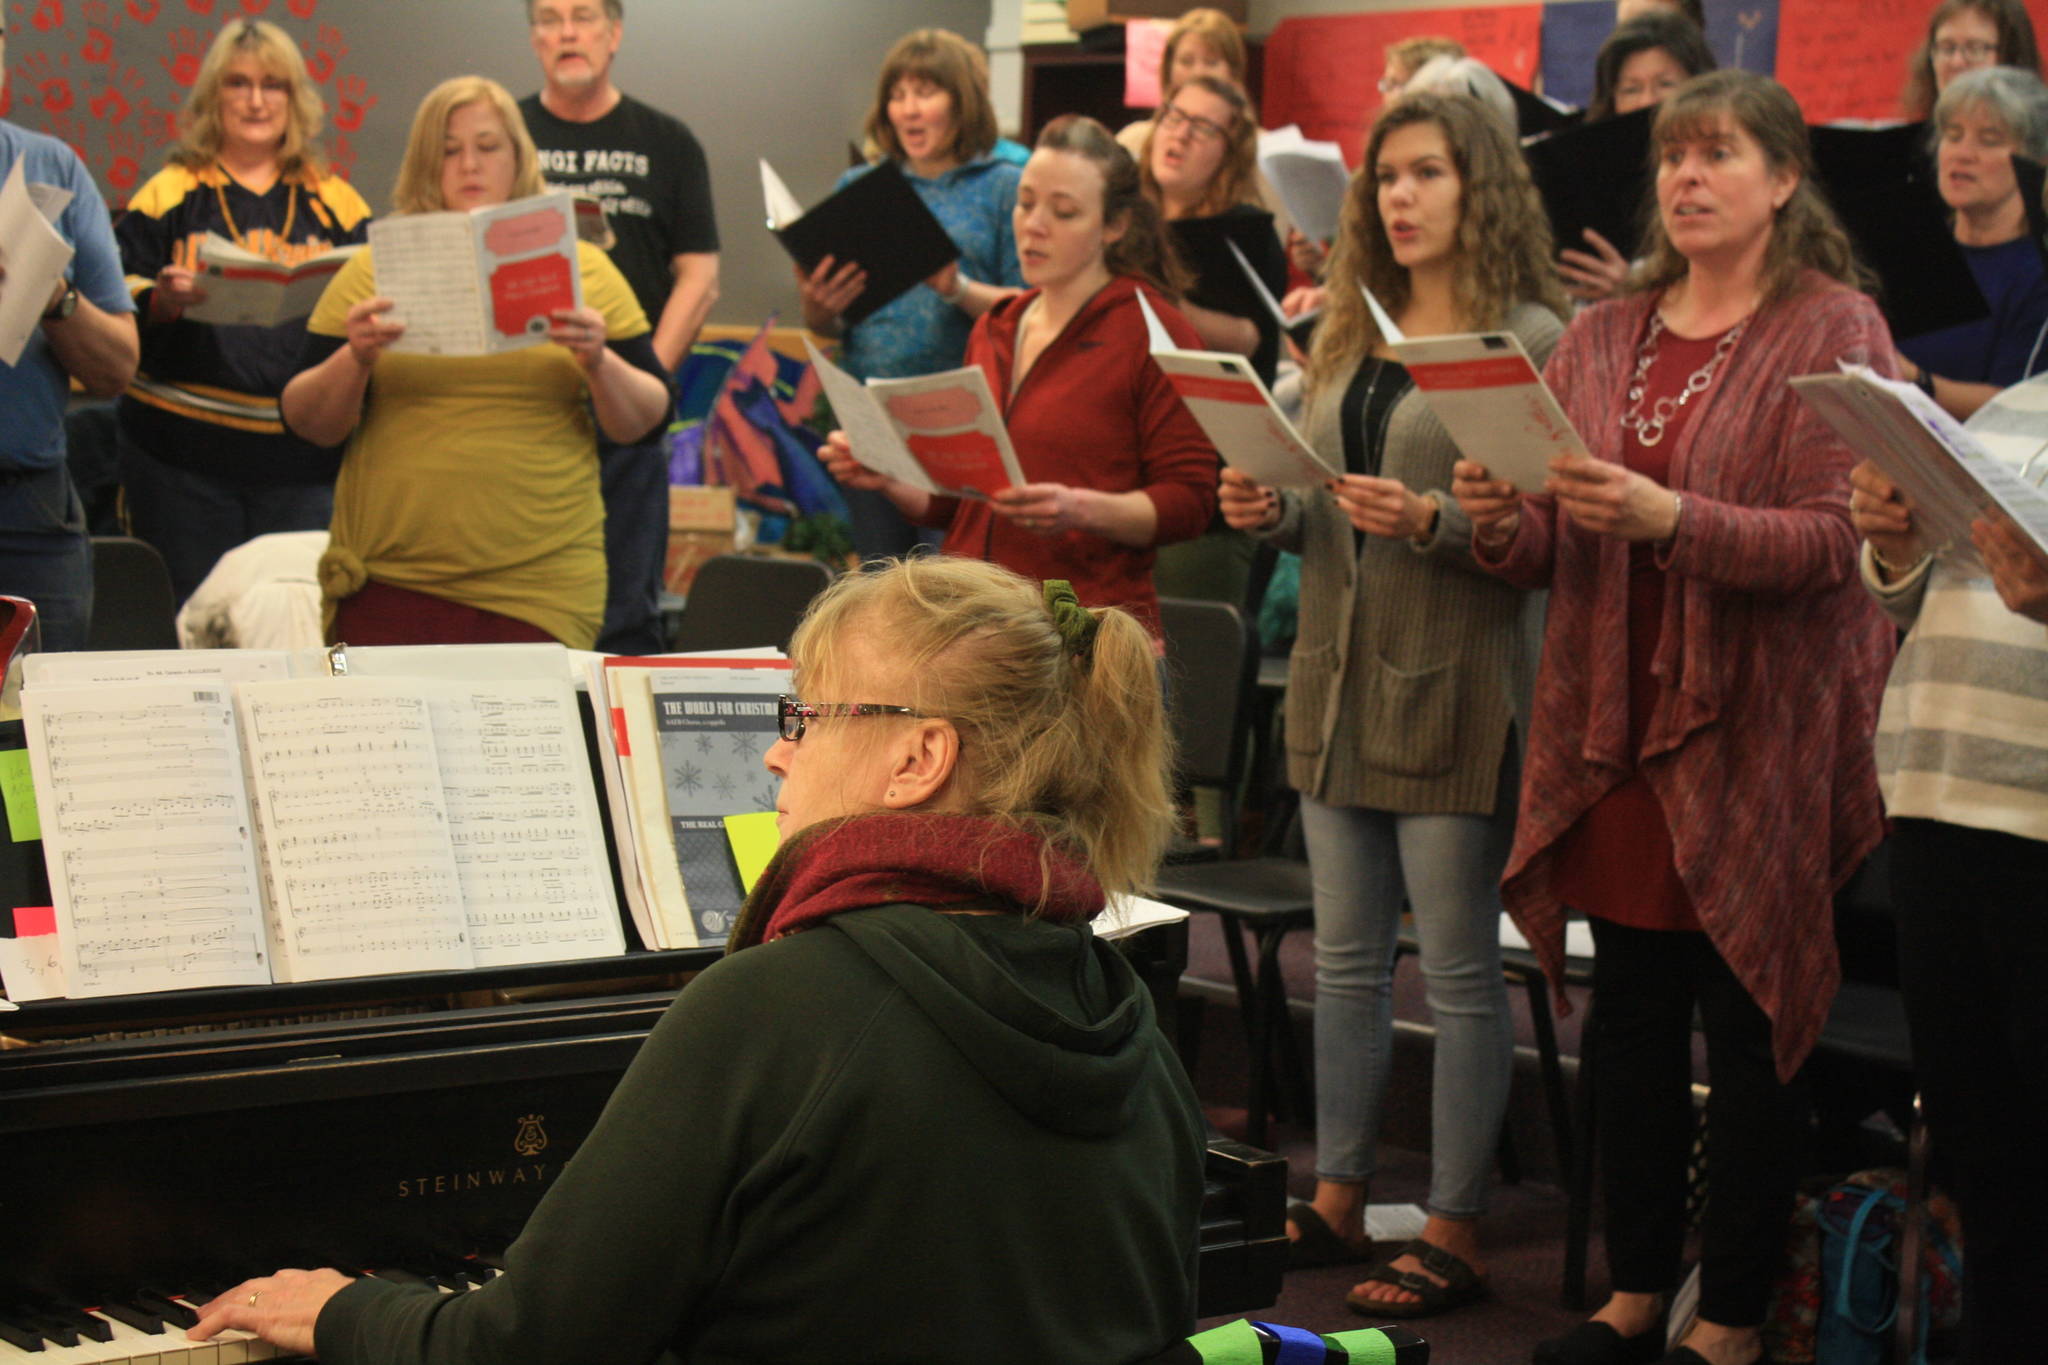 Accompanist Maria Allison plays during a rehearsal of the Kenai Peninsula Singers on Dec. 11. The Peninsula Singers and Redoubt Chamber Orchestra will perform together in the 2017 Evening of Christmas on Friday, Dec. 15. (Photo by Erin Thompson/Peninsula Clarion)